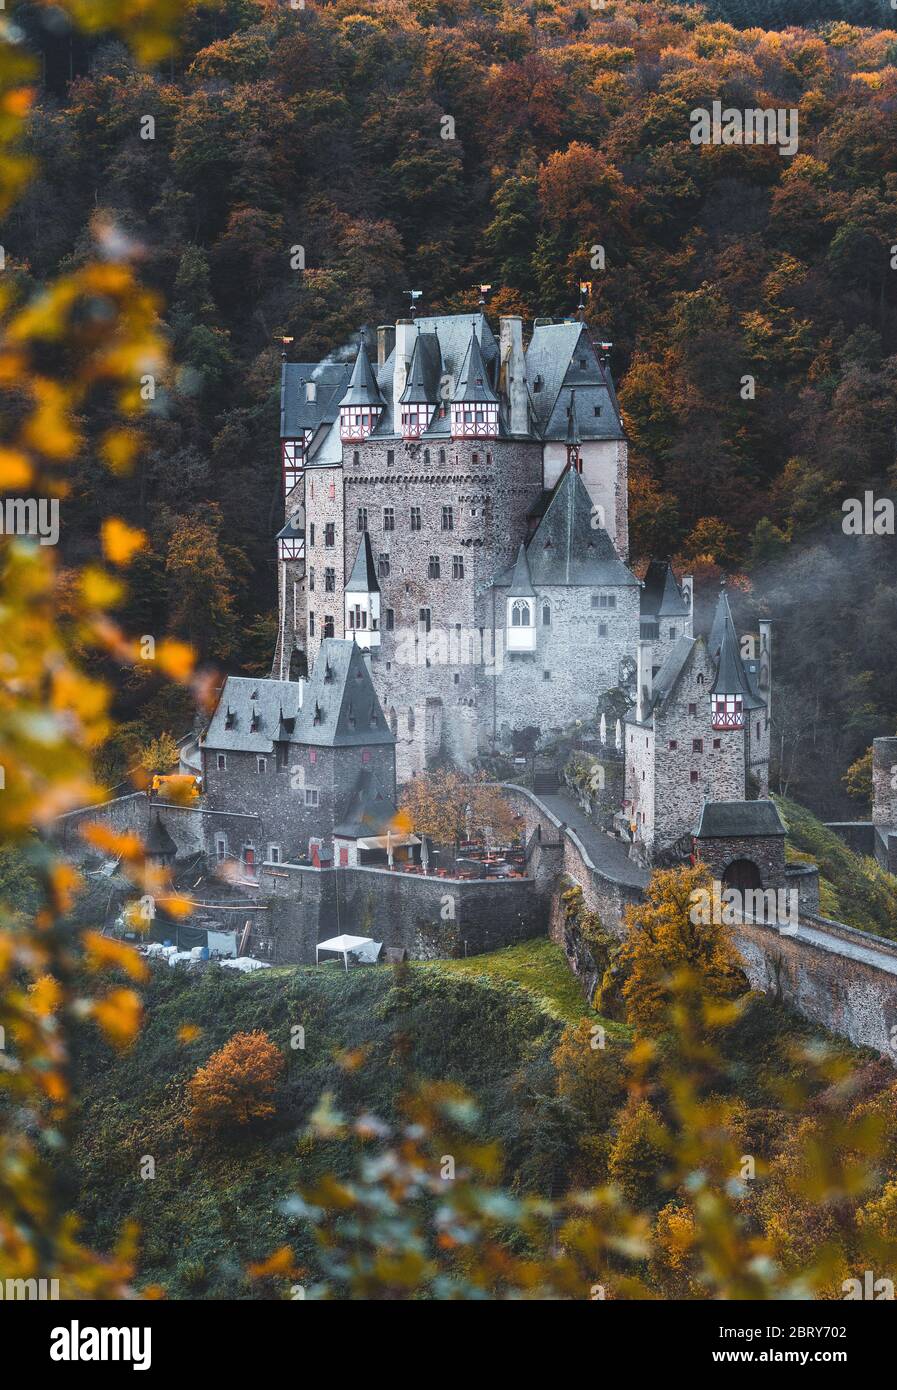 Burg Eltz / Castle Eltz during sunset on a misty autumn day with orange trees and leaves and fog rolling through the valley (Wierschem, Germany, Europ Stock Photo